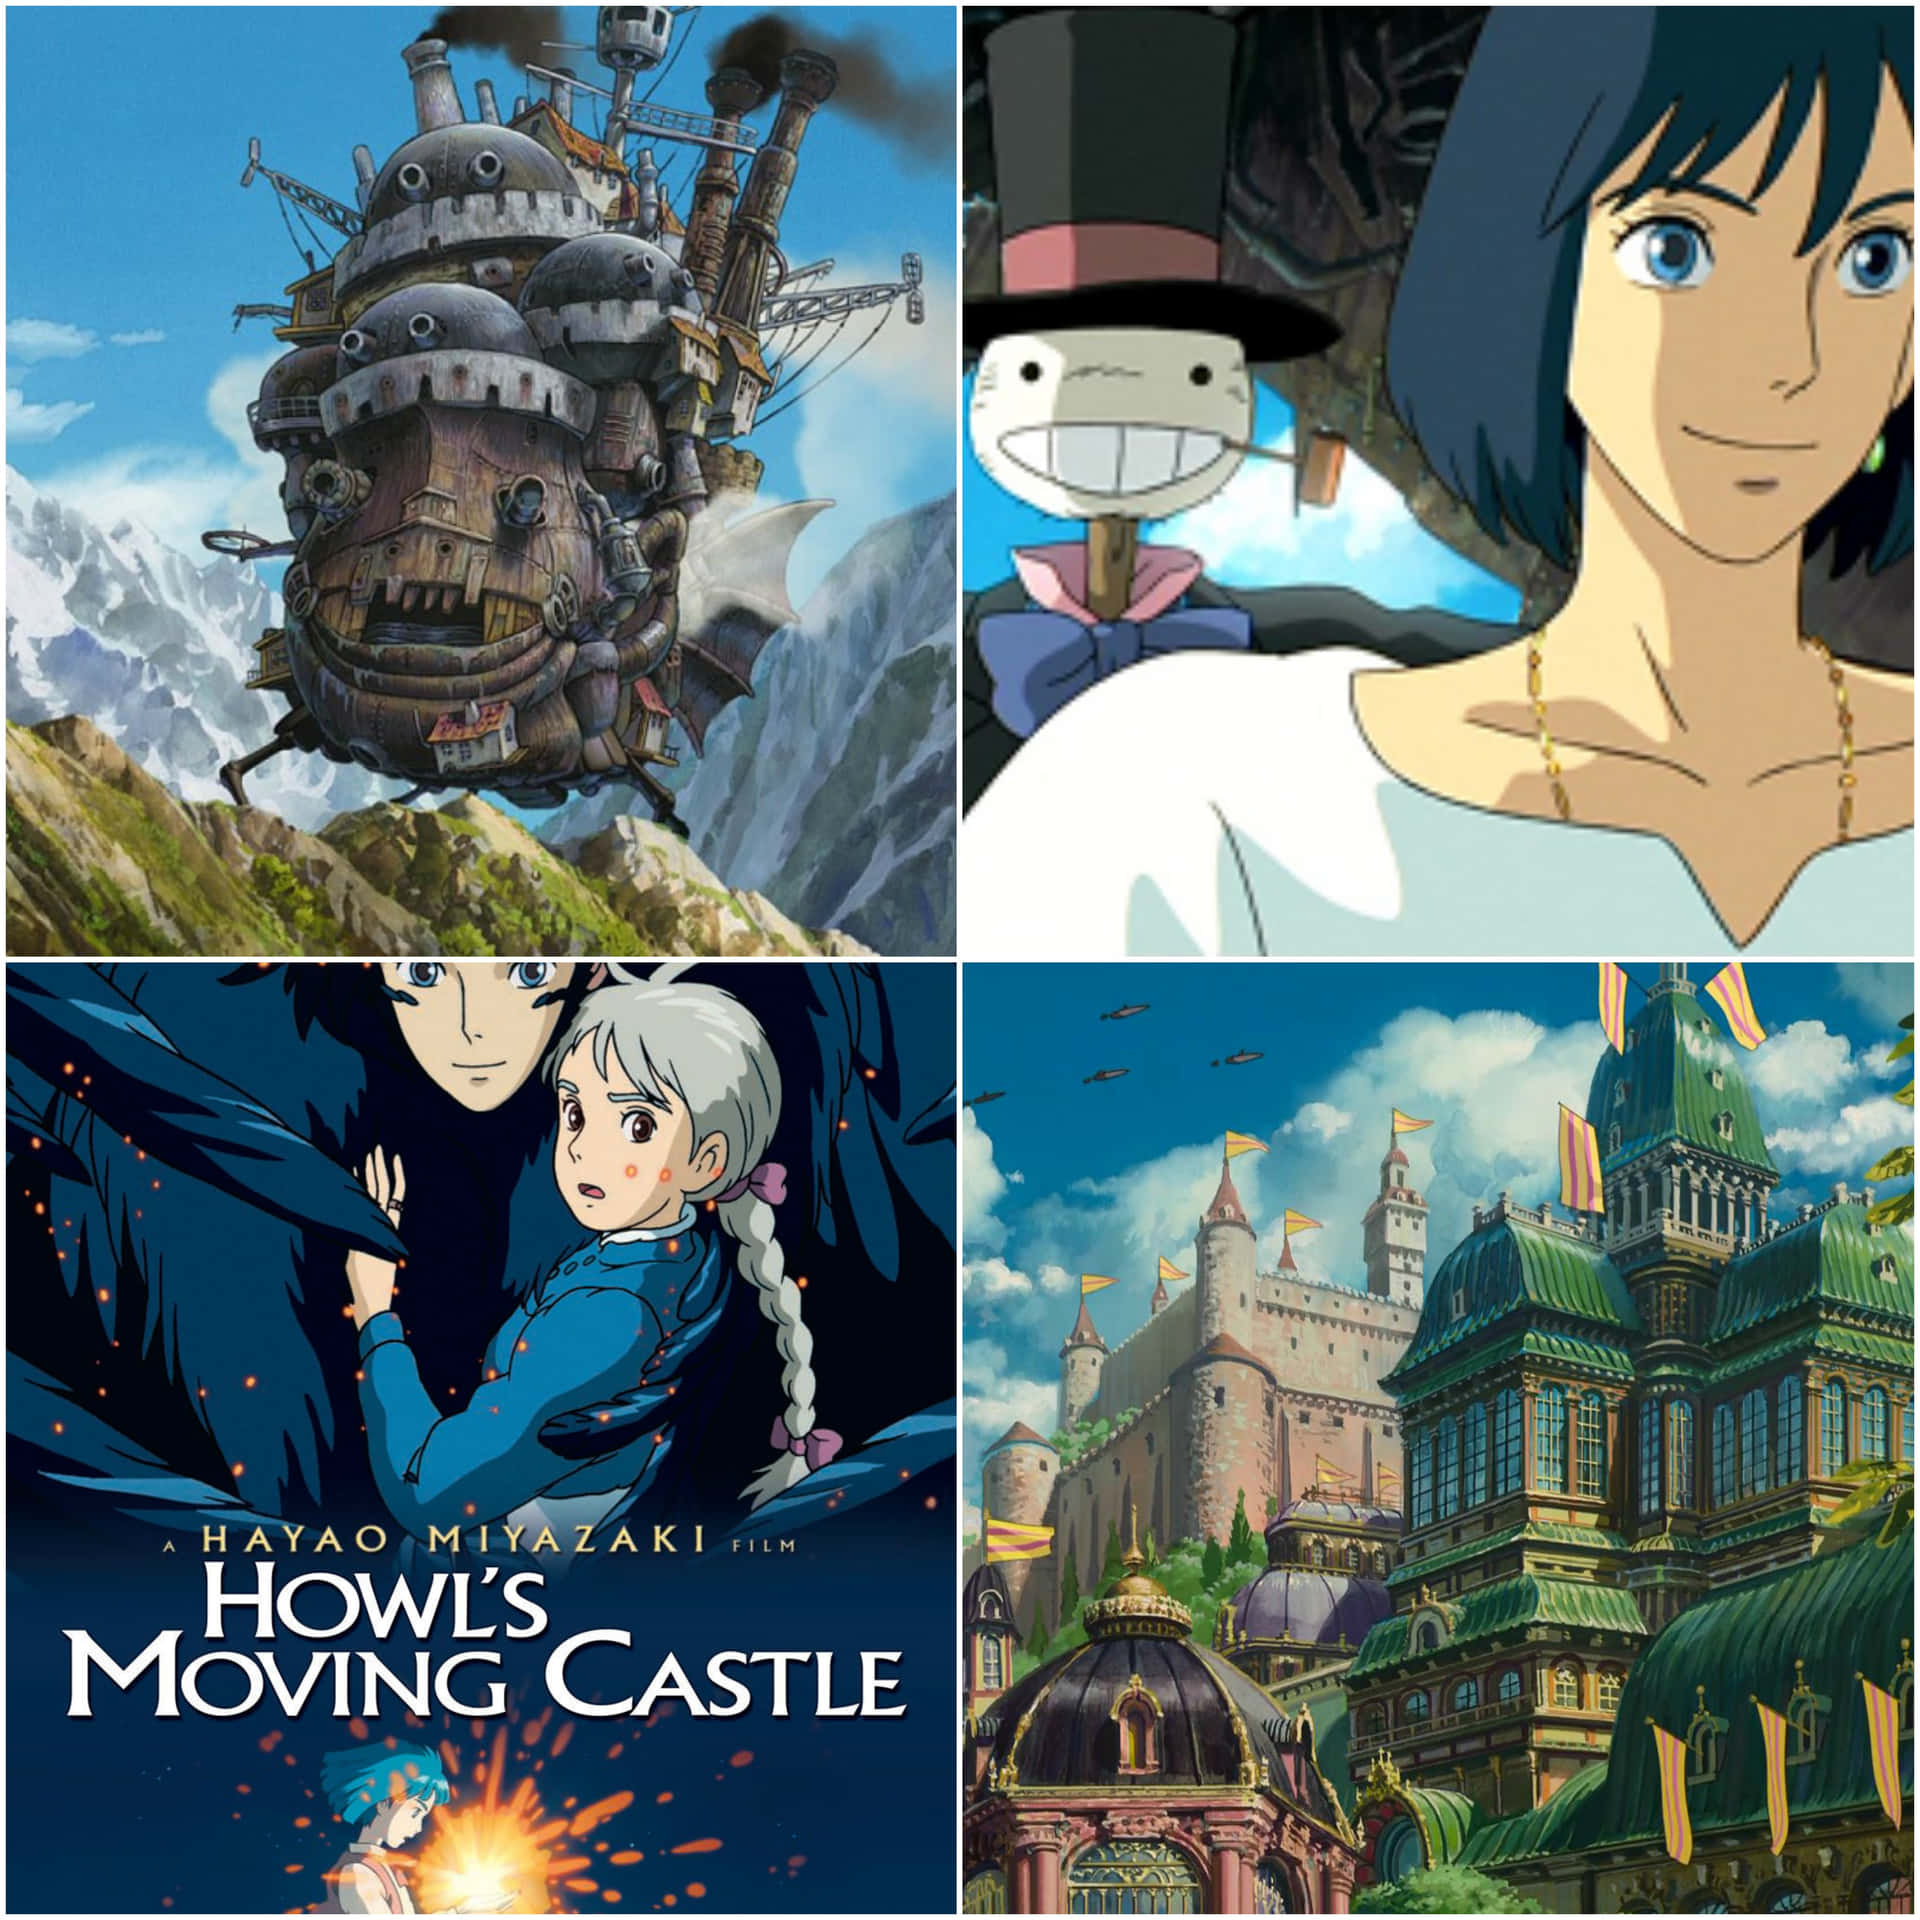 Howl's Moving Castle, a tranquil meadow